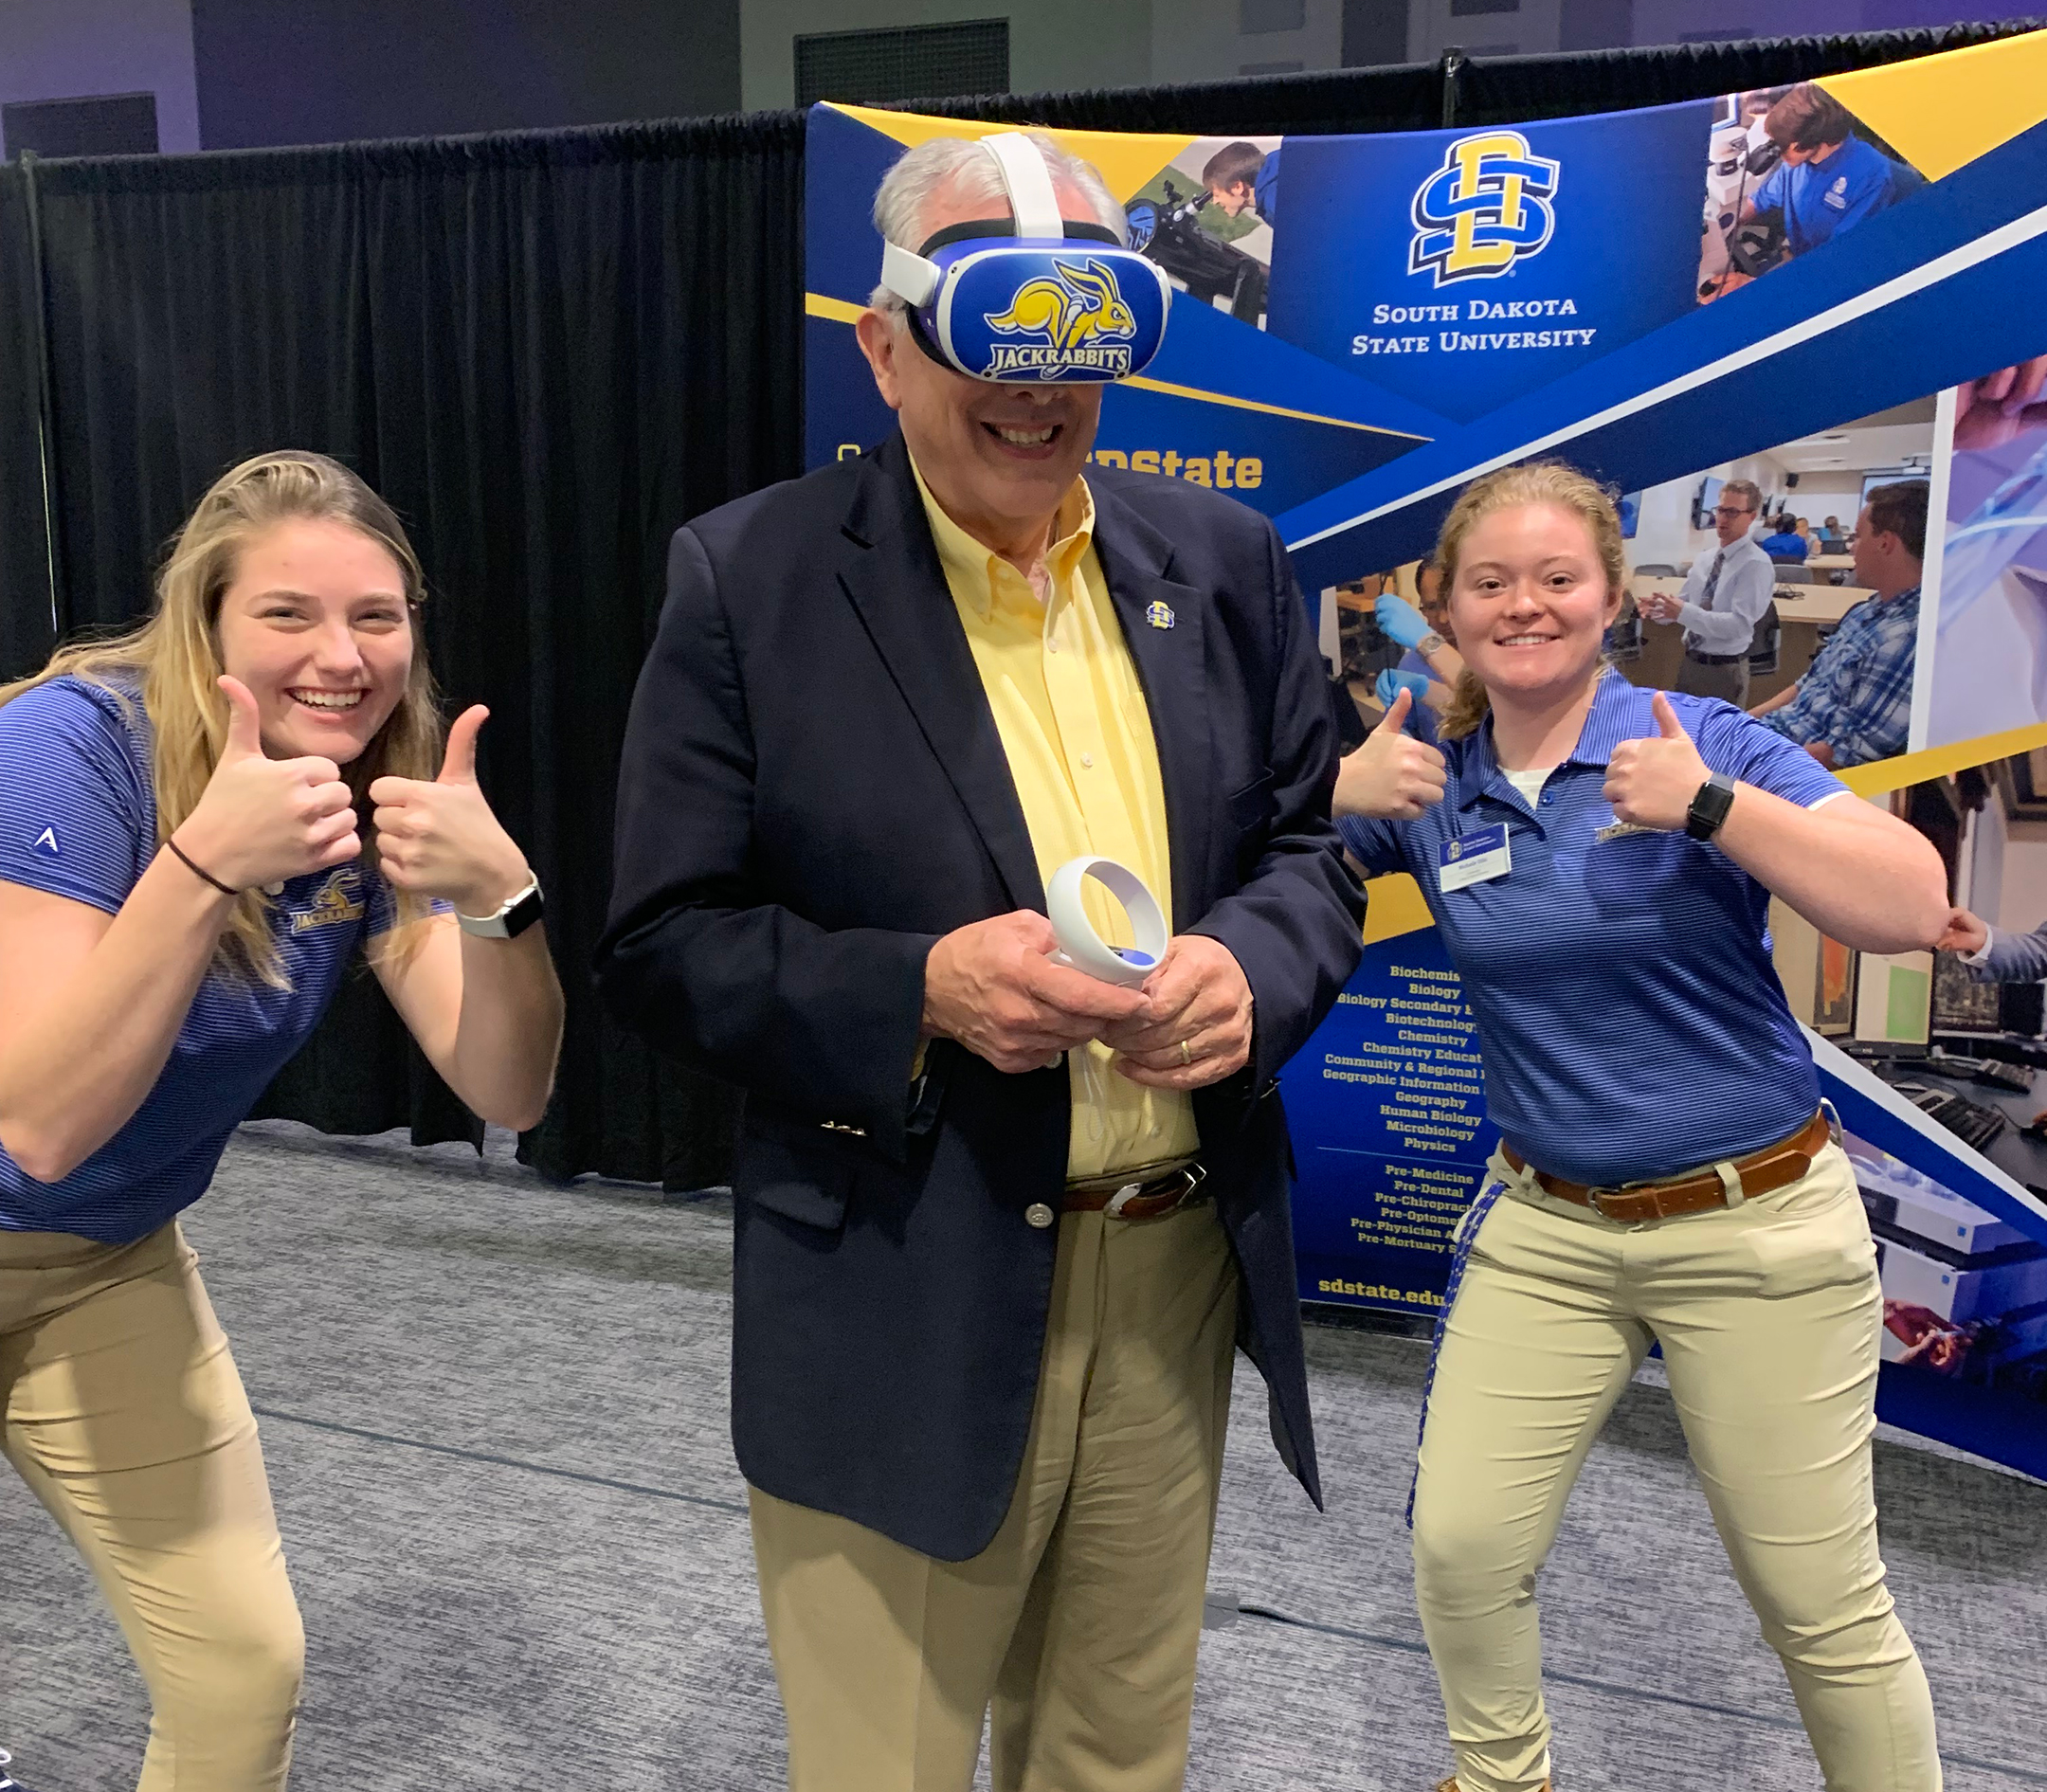 Two smiling young women with thumbs up and an older smiling man wearing a VR headset standing between them